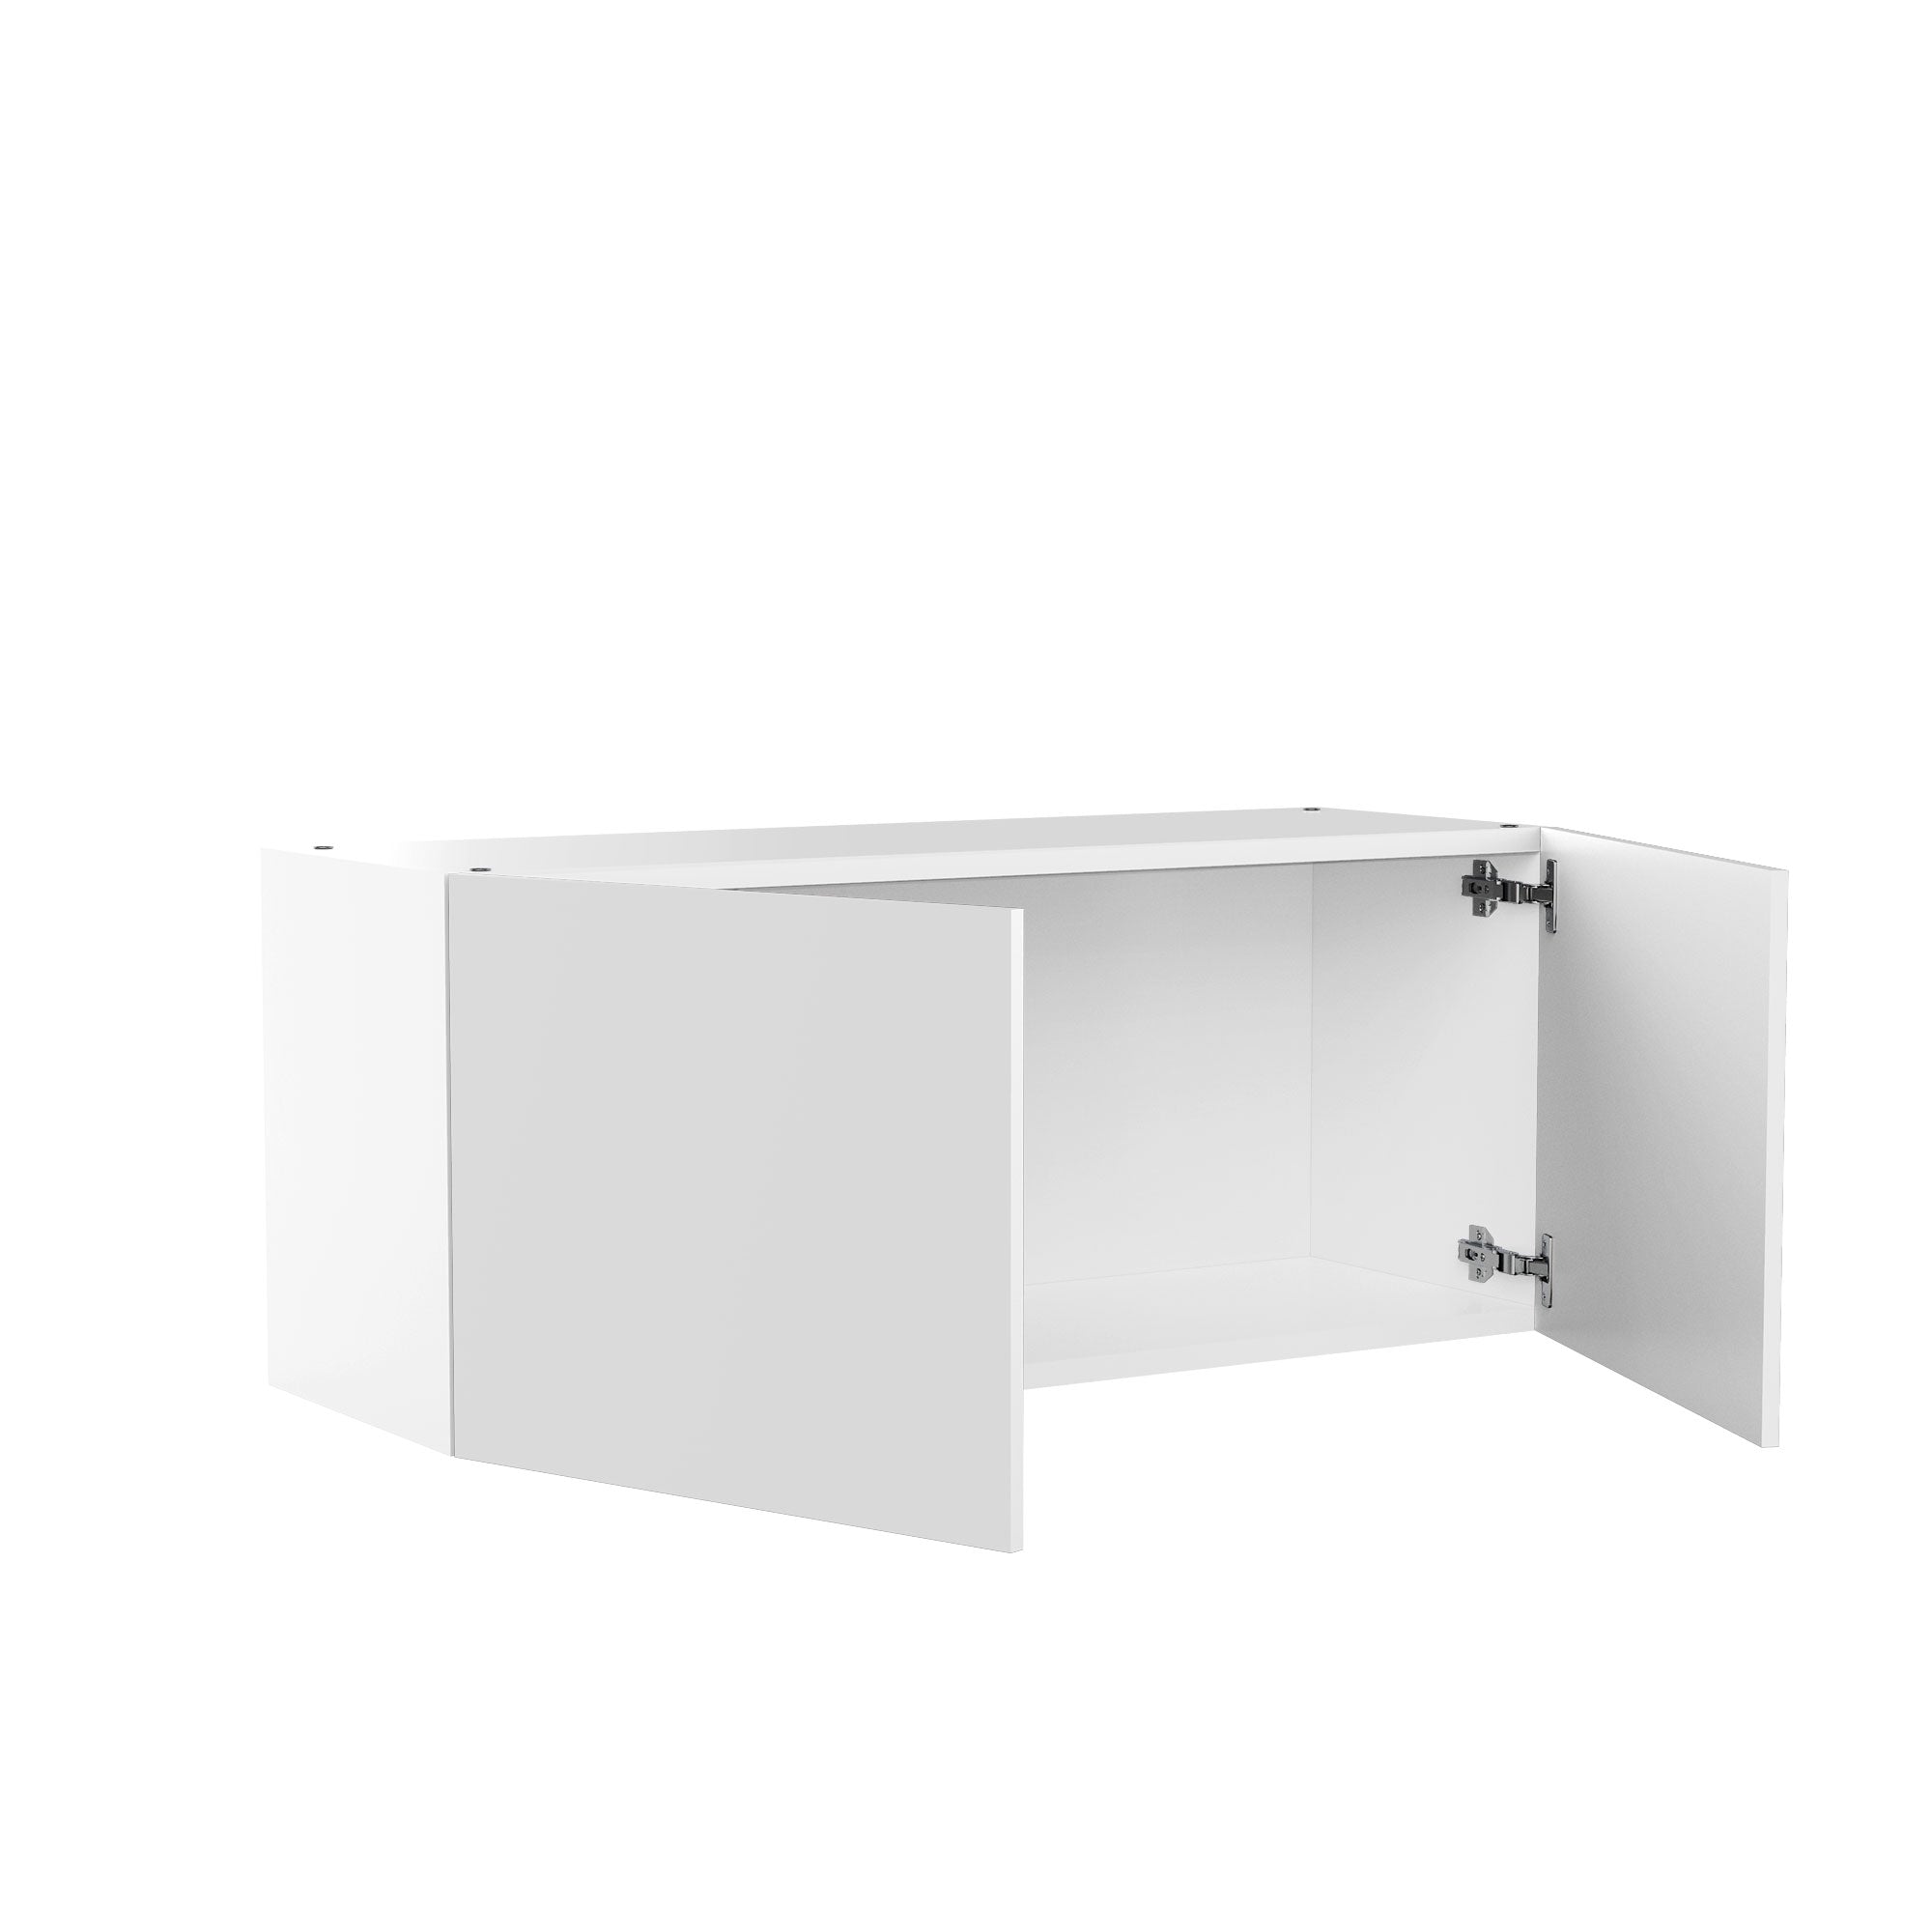 RTA - Glossy White - Double Door Wall Cabinets | 33"W x 15"H x 12"D